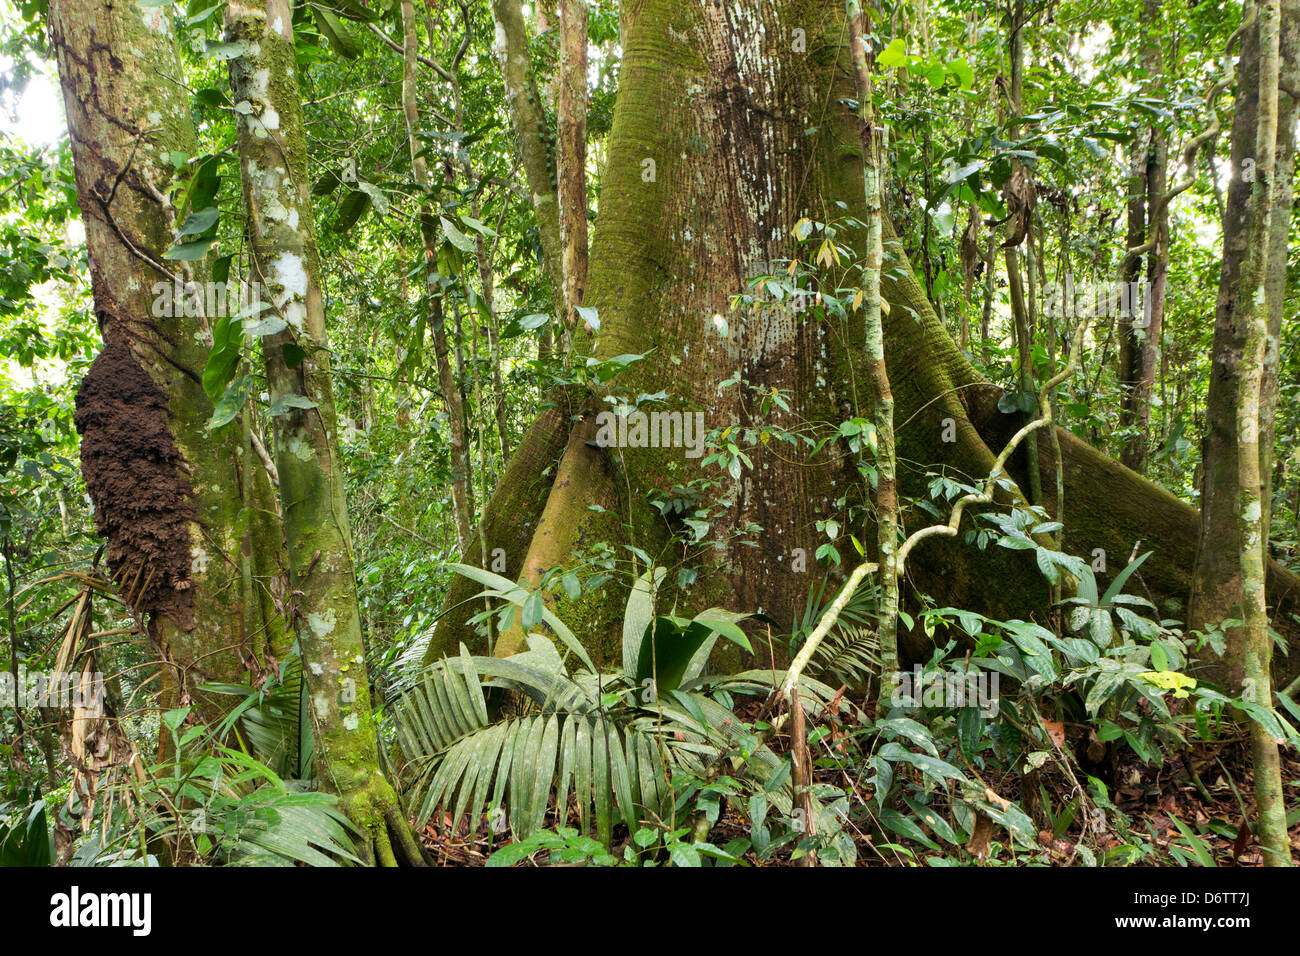 Large tree with buttress roots in primary tropical rainforest, Ecuador Stock Photo